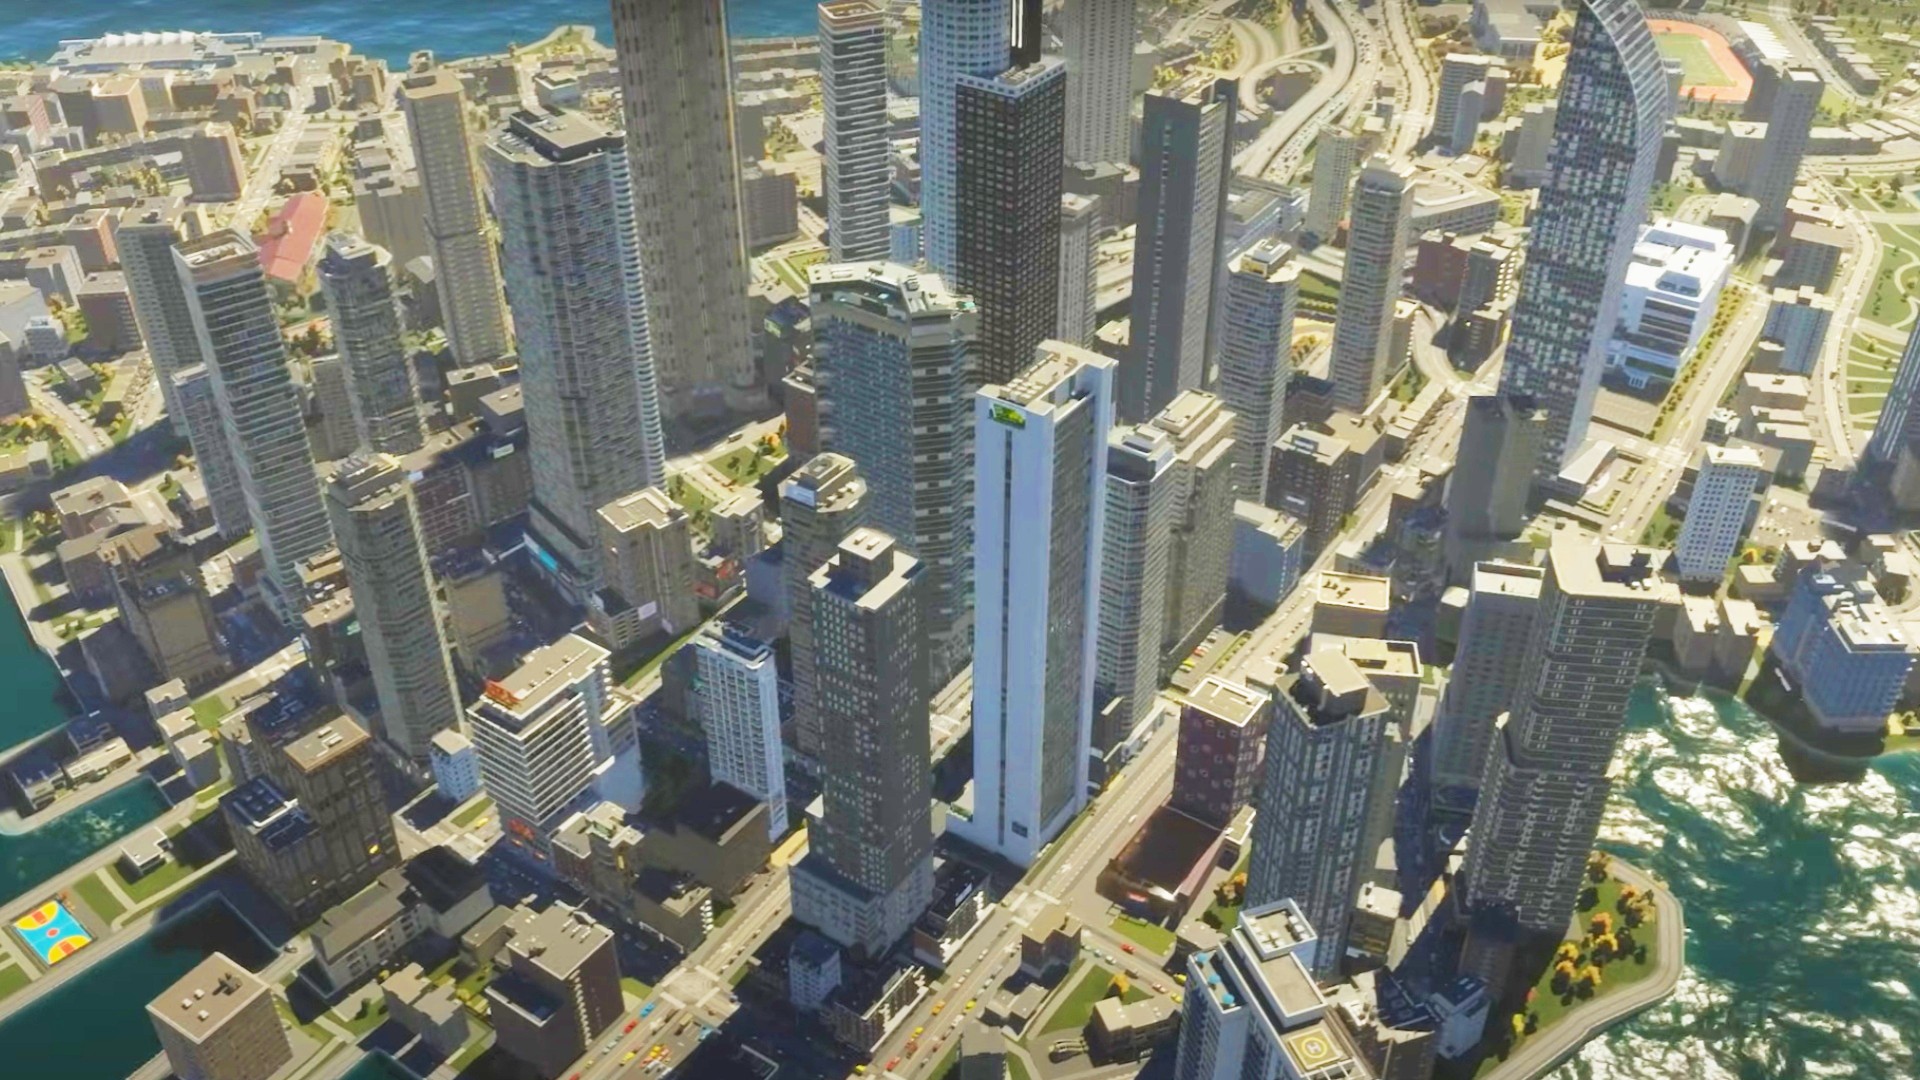 Cities Skylines 2 Economy 2.0 update: A huge downtown area from city building game Cities Skylines 2